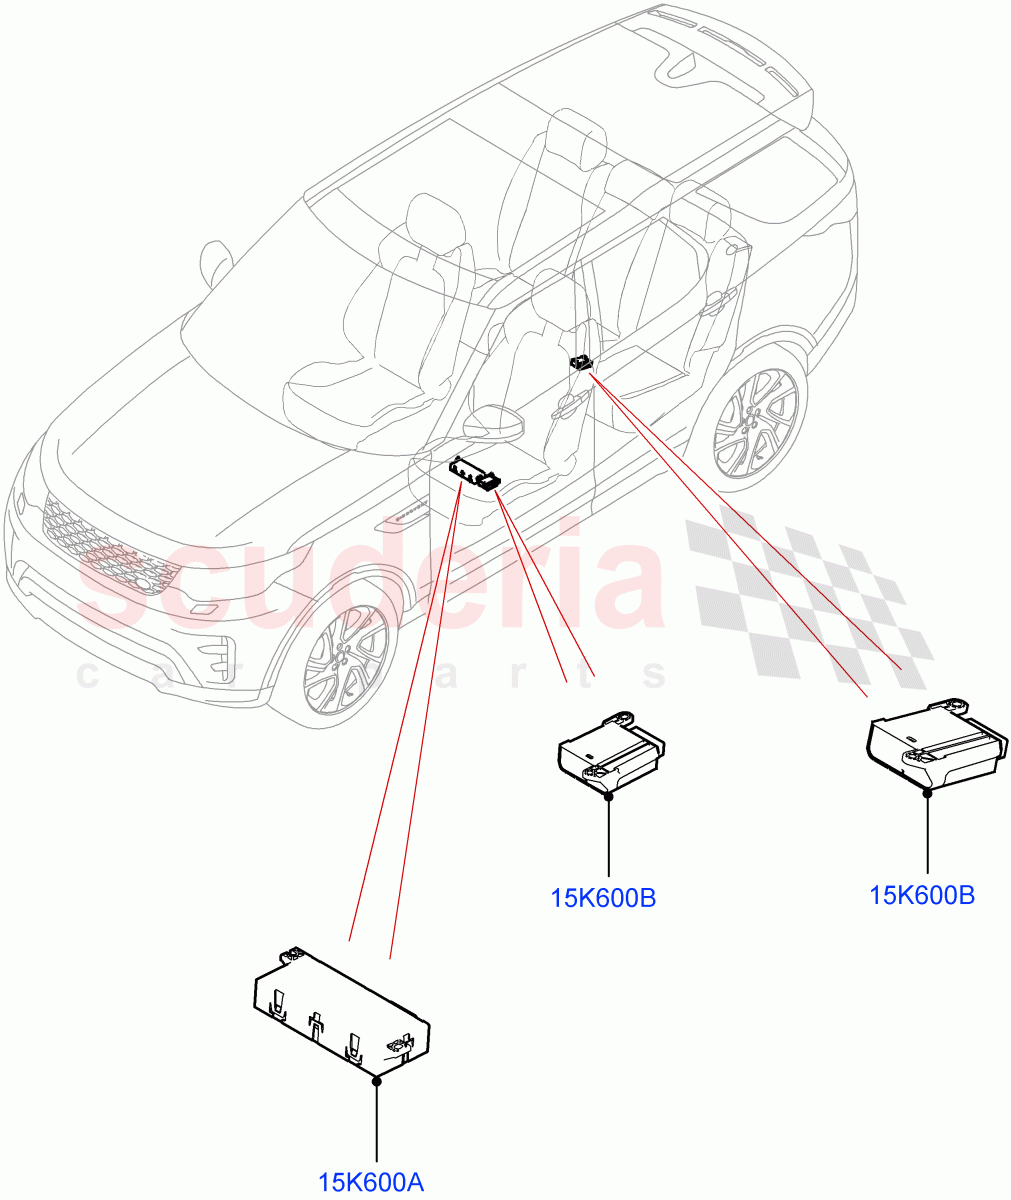 Vehicle Modules And Sensors(Seats, Solihull Plant Build)((V)FROMHA000001) of Land Rover Land Rover Discovery 5 (2017+) [2.0 Turbo Petrol AJ200P]